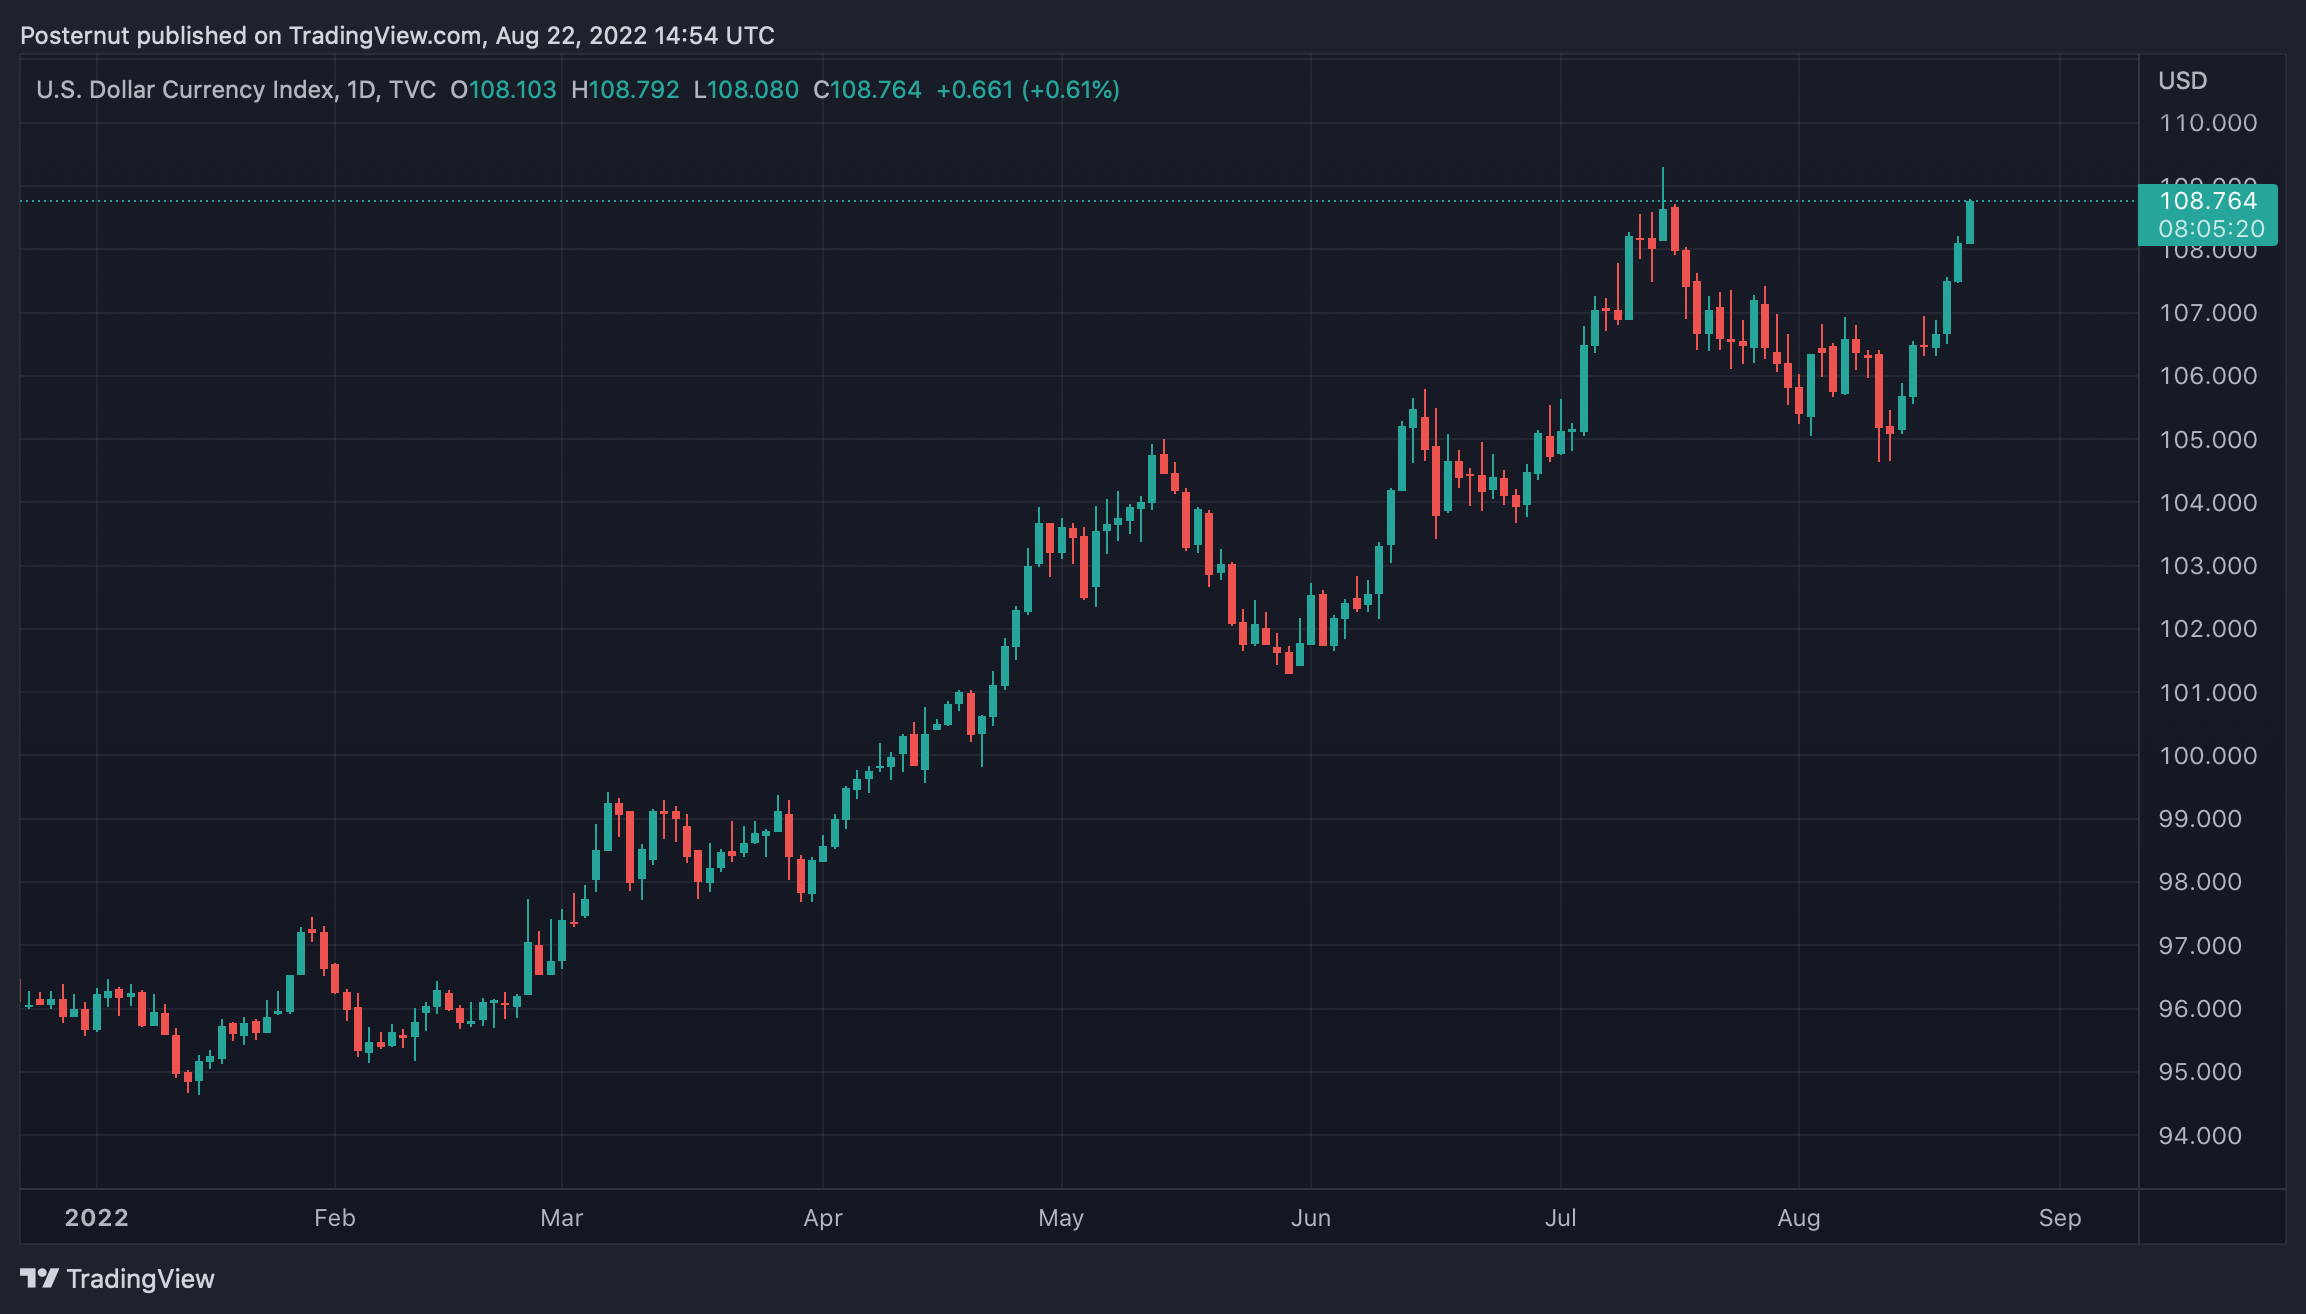 EUR Drops Below USD for the Second Time in 20 Years, Greenback’s Strength Leads to Largest Weekly Rise Since March 2020